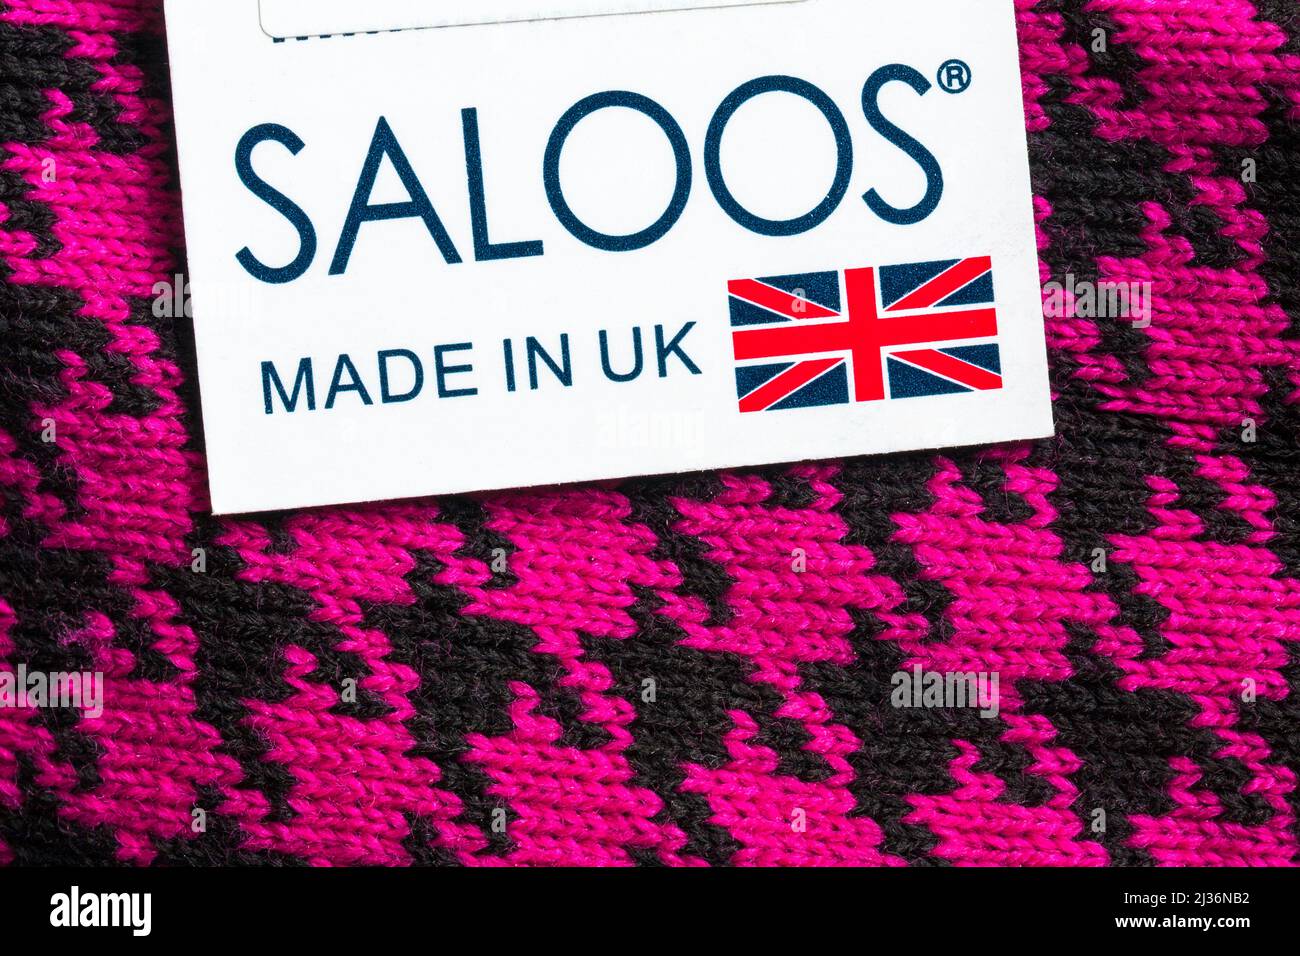 Saloos Made in UK label tag on pink and black jumper clothing garment Stock Photo